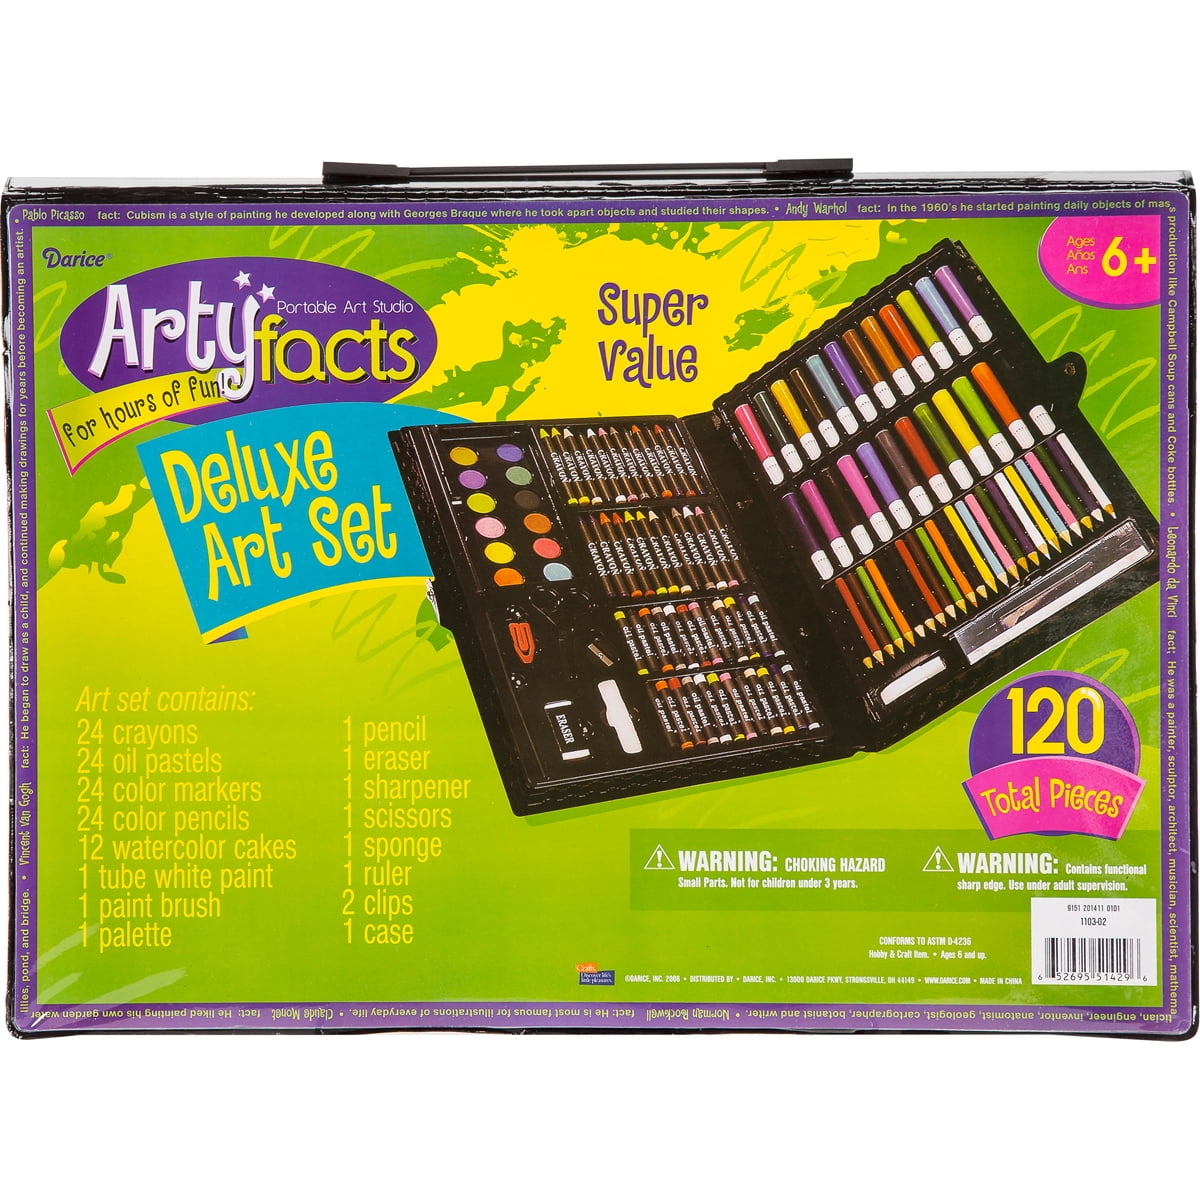 iBayam Deluxe Art Set, 195-Pack Artist Gift Box, Arts and Crafts Drawing  Painting Kit Art Supplies for Adults Kids, Art Kits Paint Set with 24  Acrylic